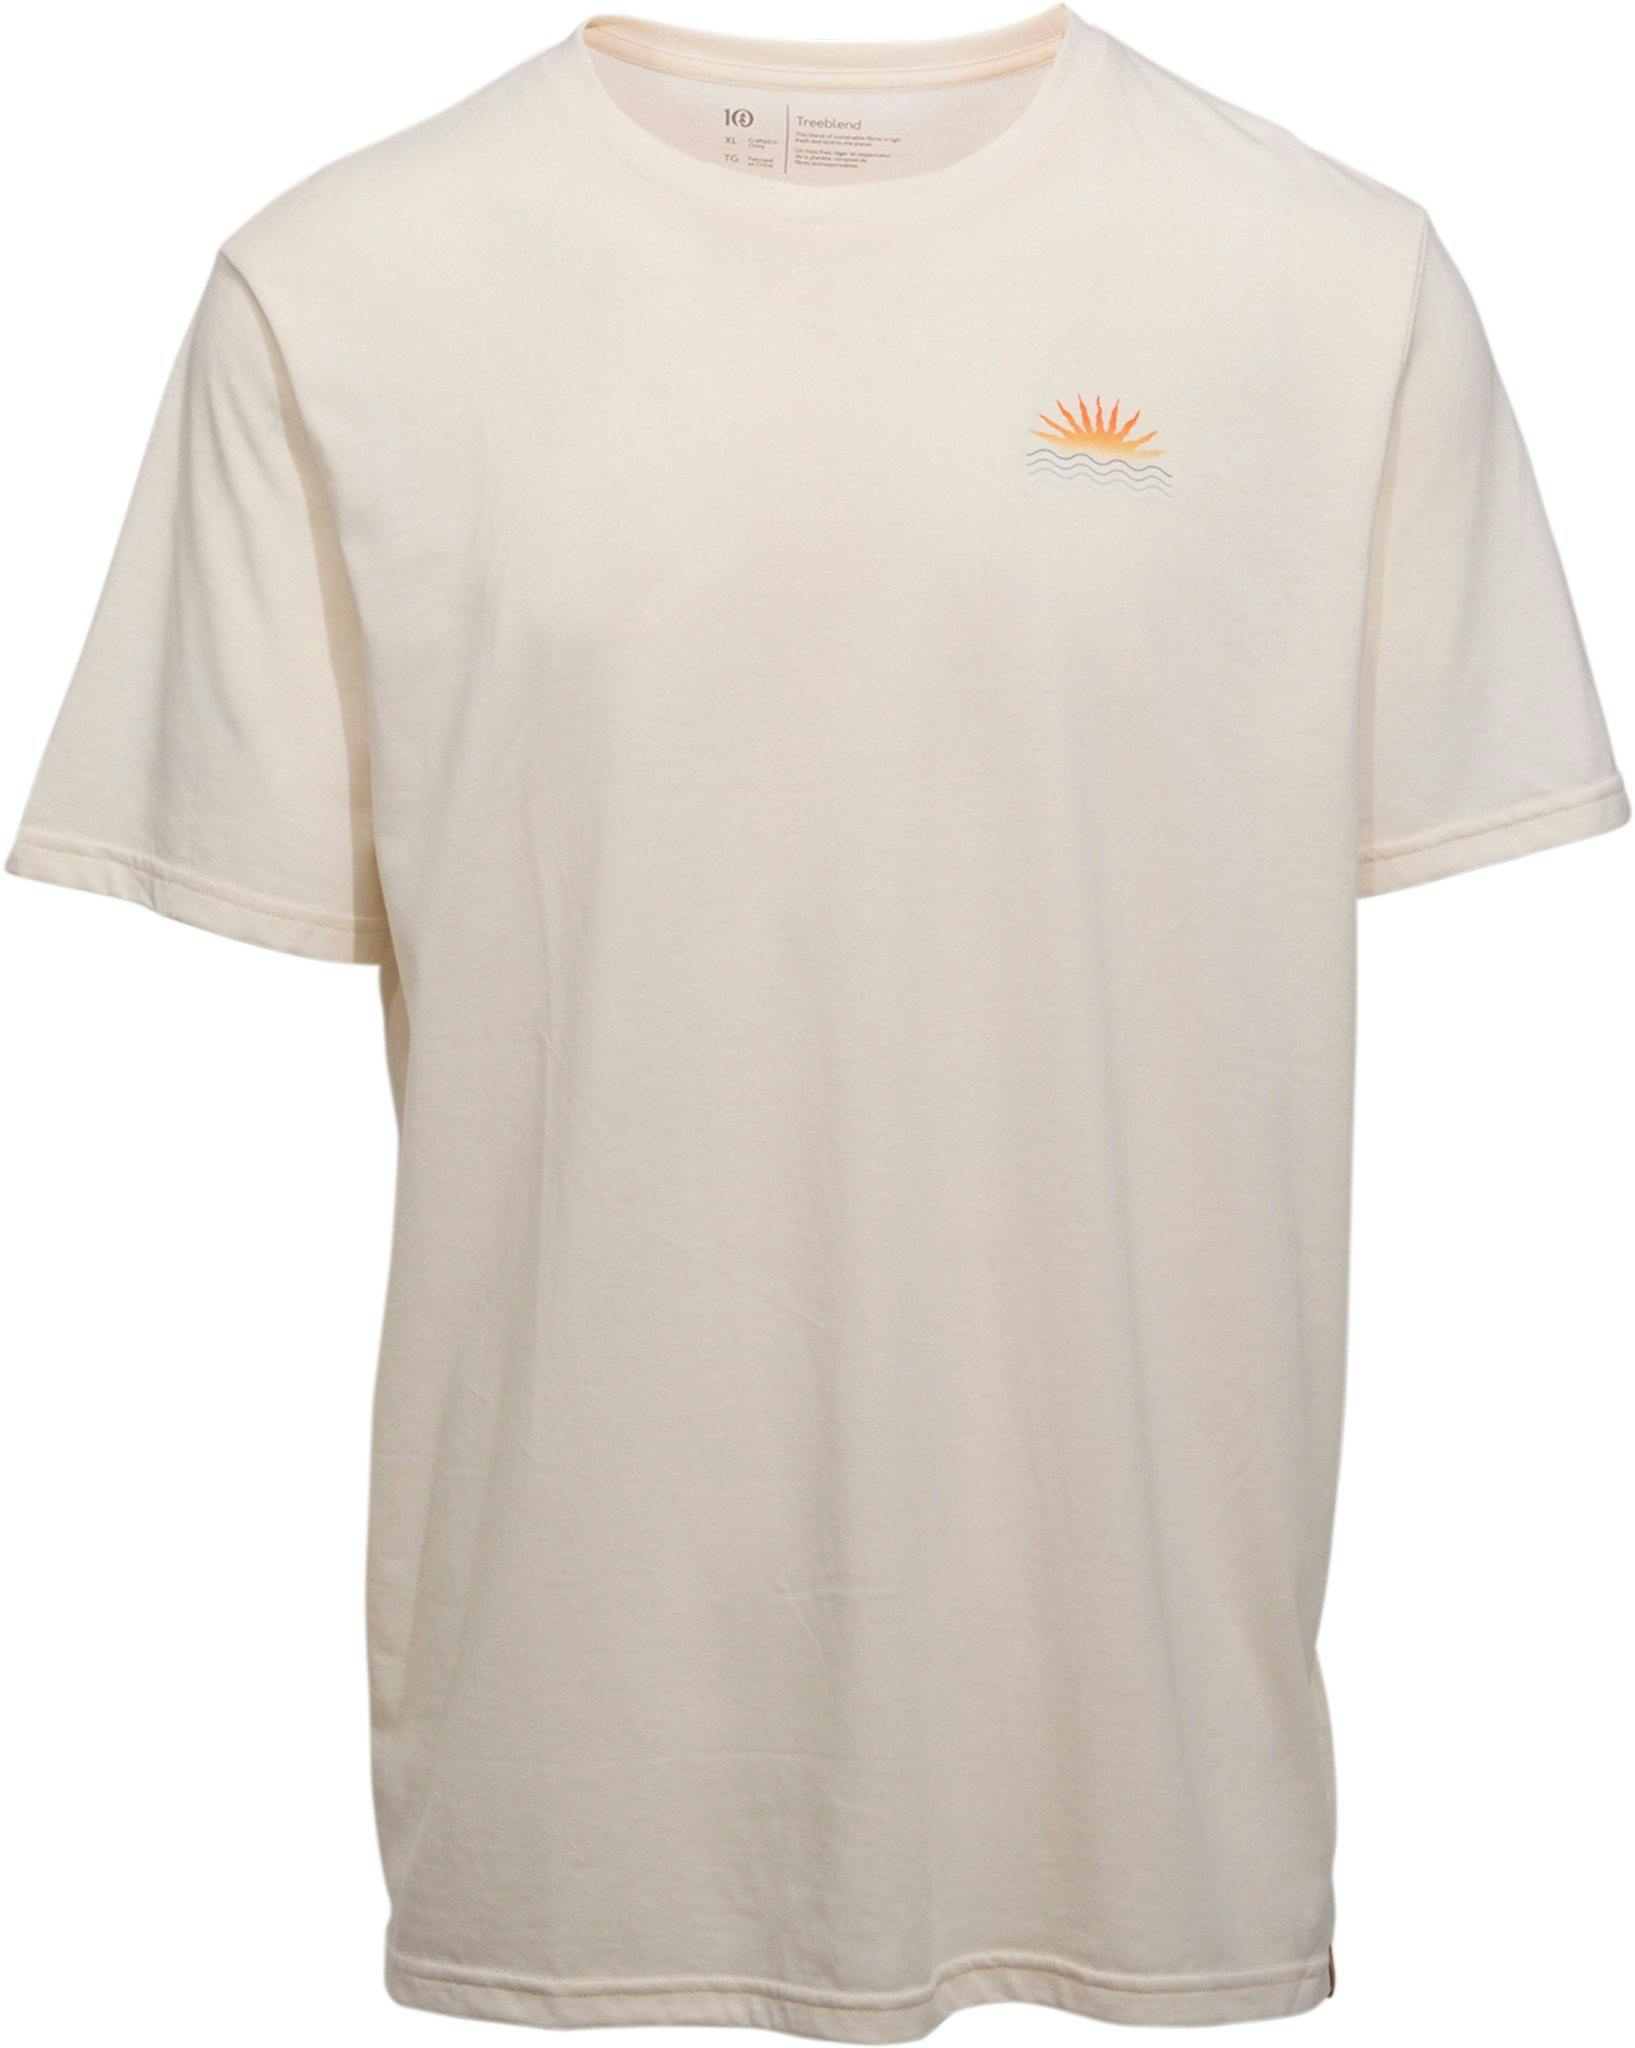 Product image for Tentree Sunset T-Shirt - Men's